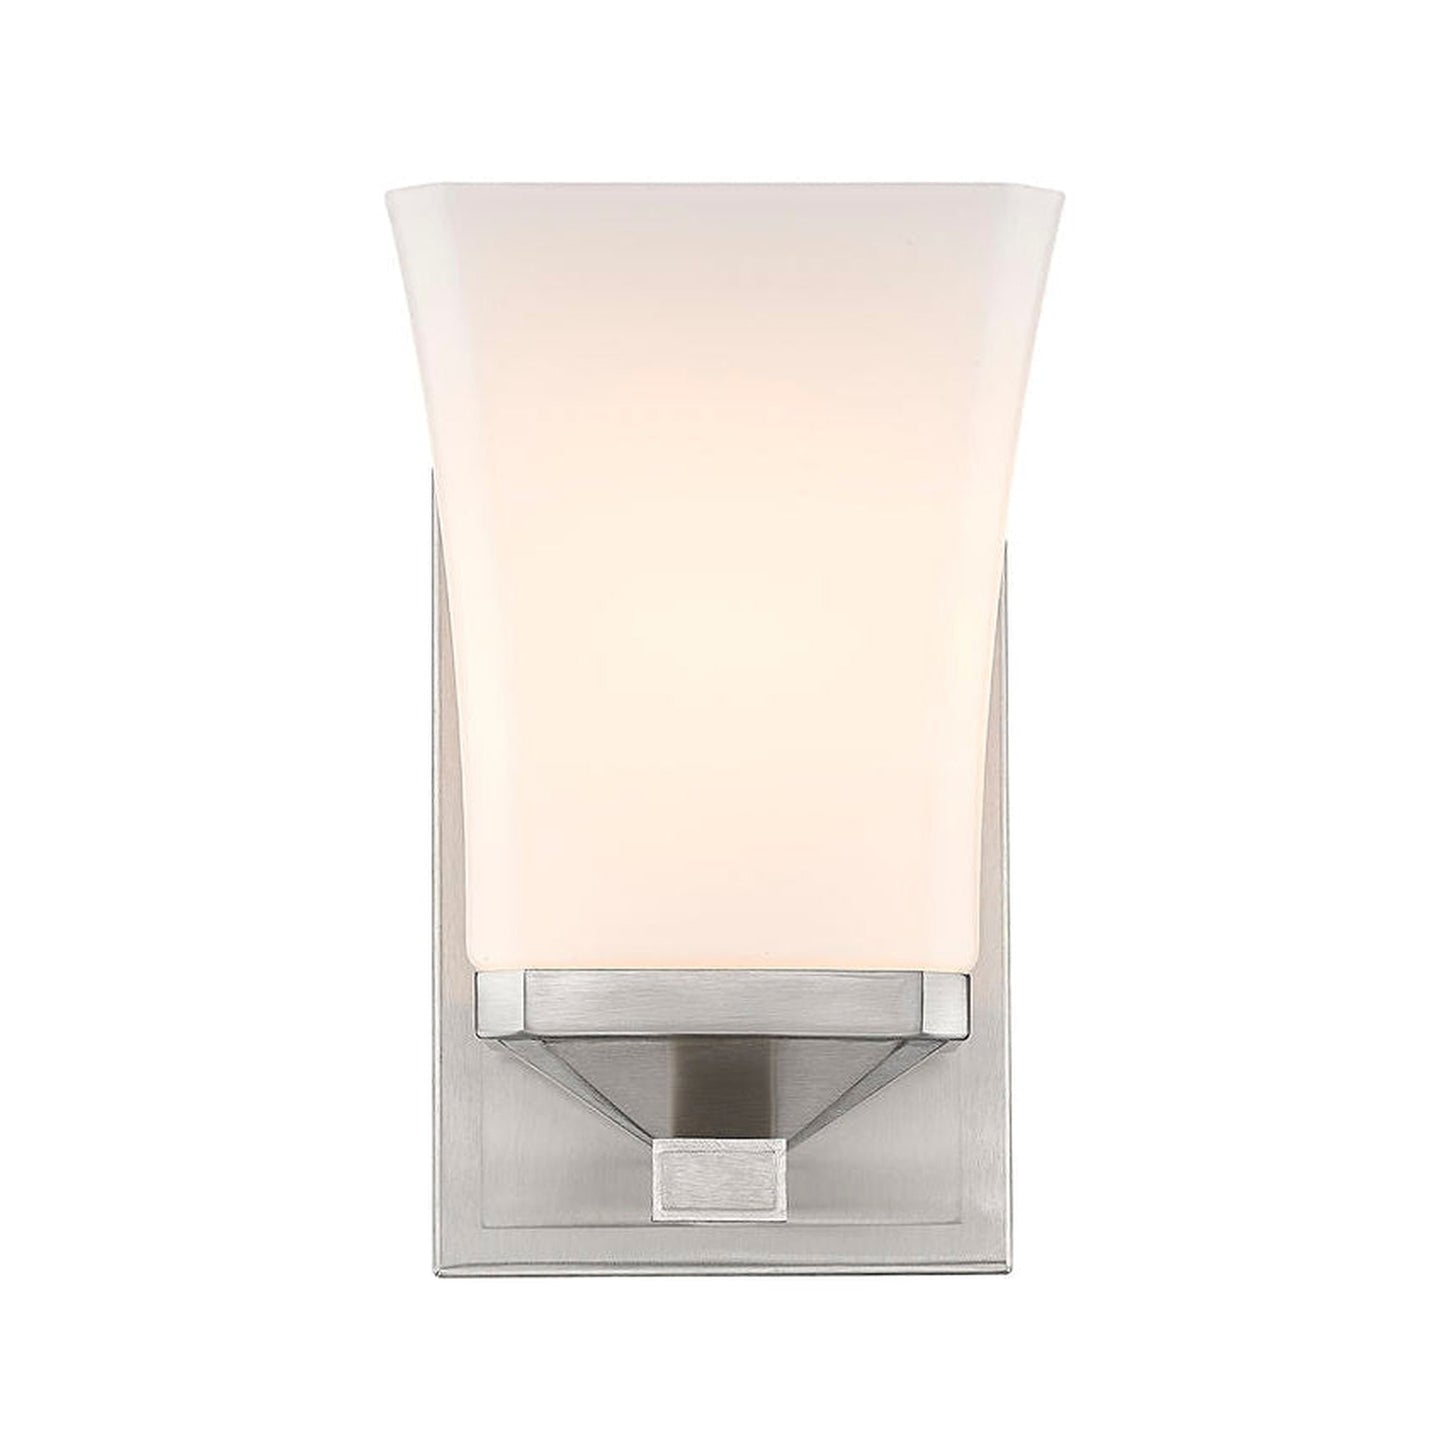 Z-Lite Darcy 5" 1-Light Brushed Nickel Wall Sconce With Etched Opal Glass Shade